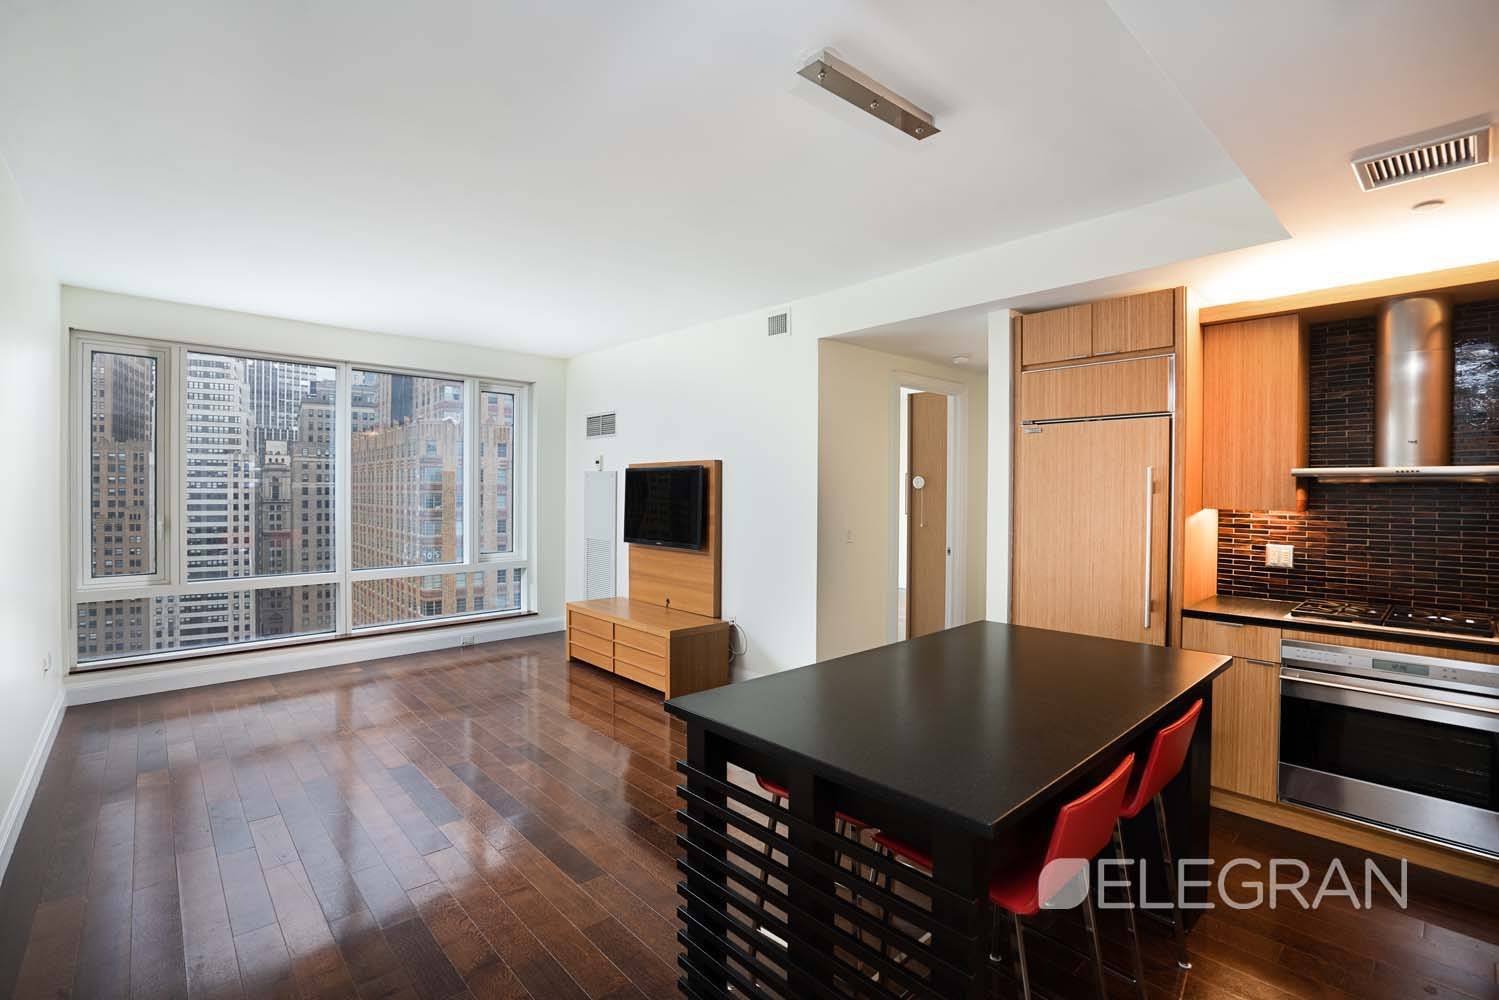 Nestled within the luxurious and Green Condominium, The Visionaire, is this spacious 819sqft east facing apartment.